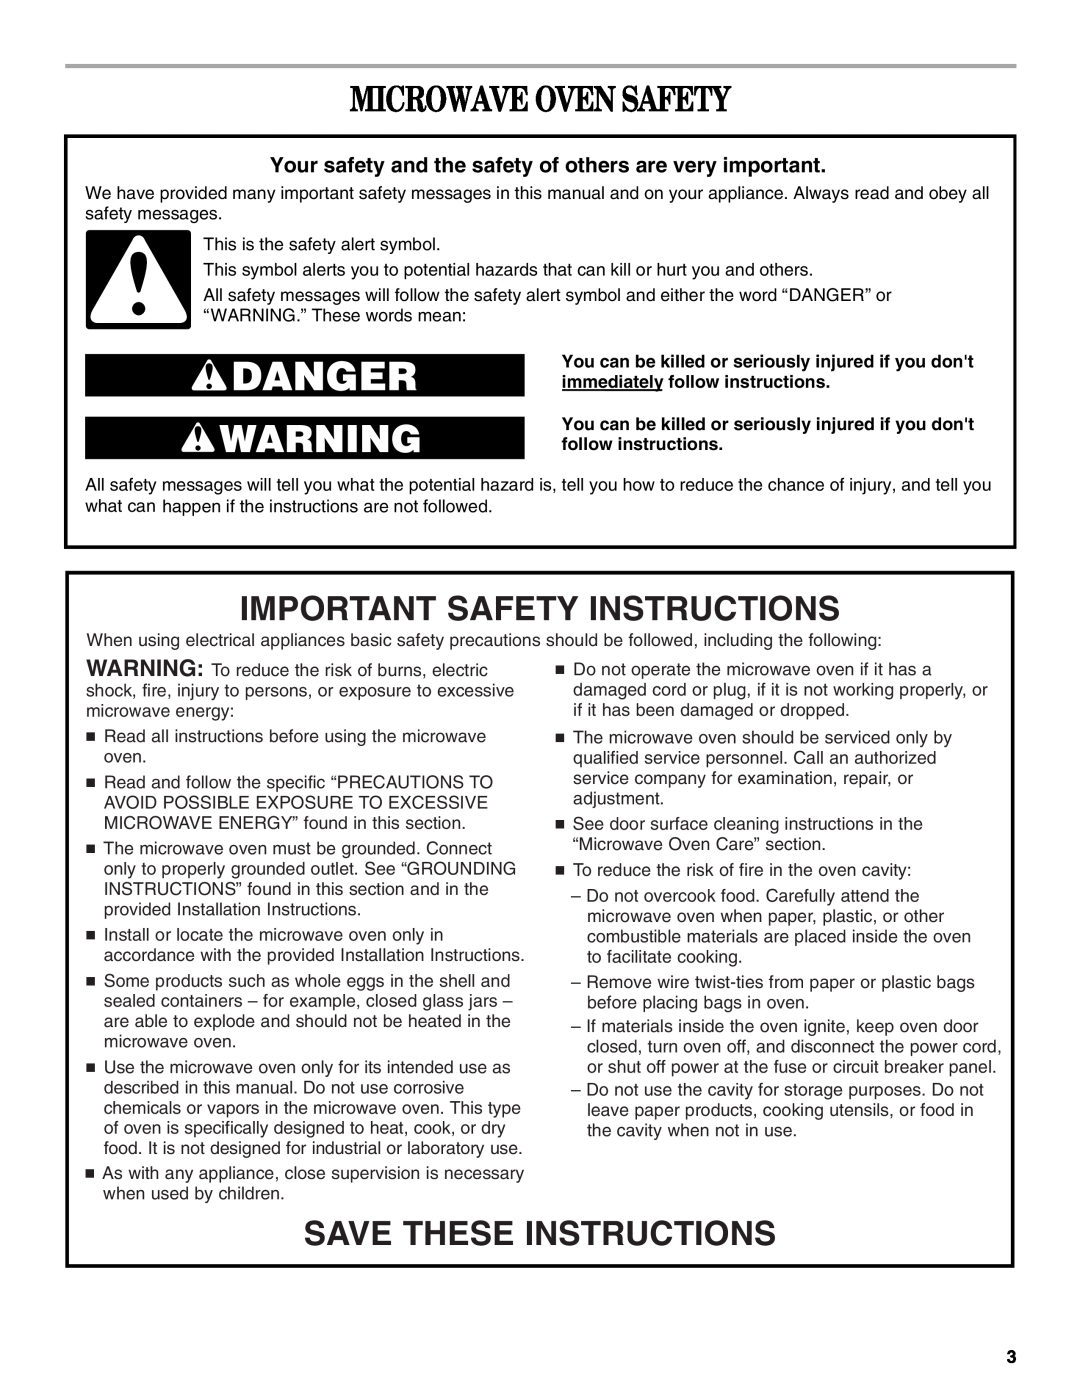 Whirlpool IOR14XR manual Microwave Oven Safety, Important Safety Instructions, Save These Instructions 